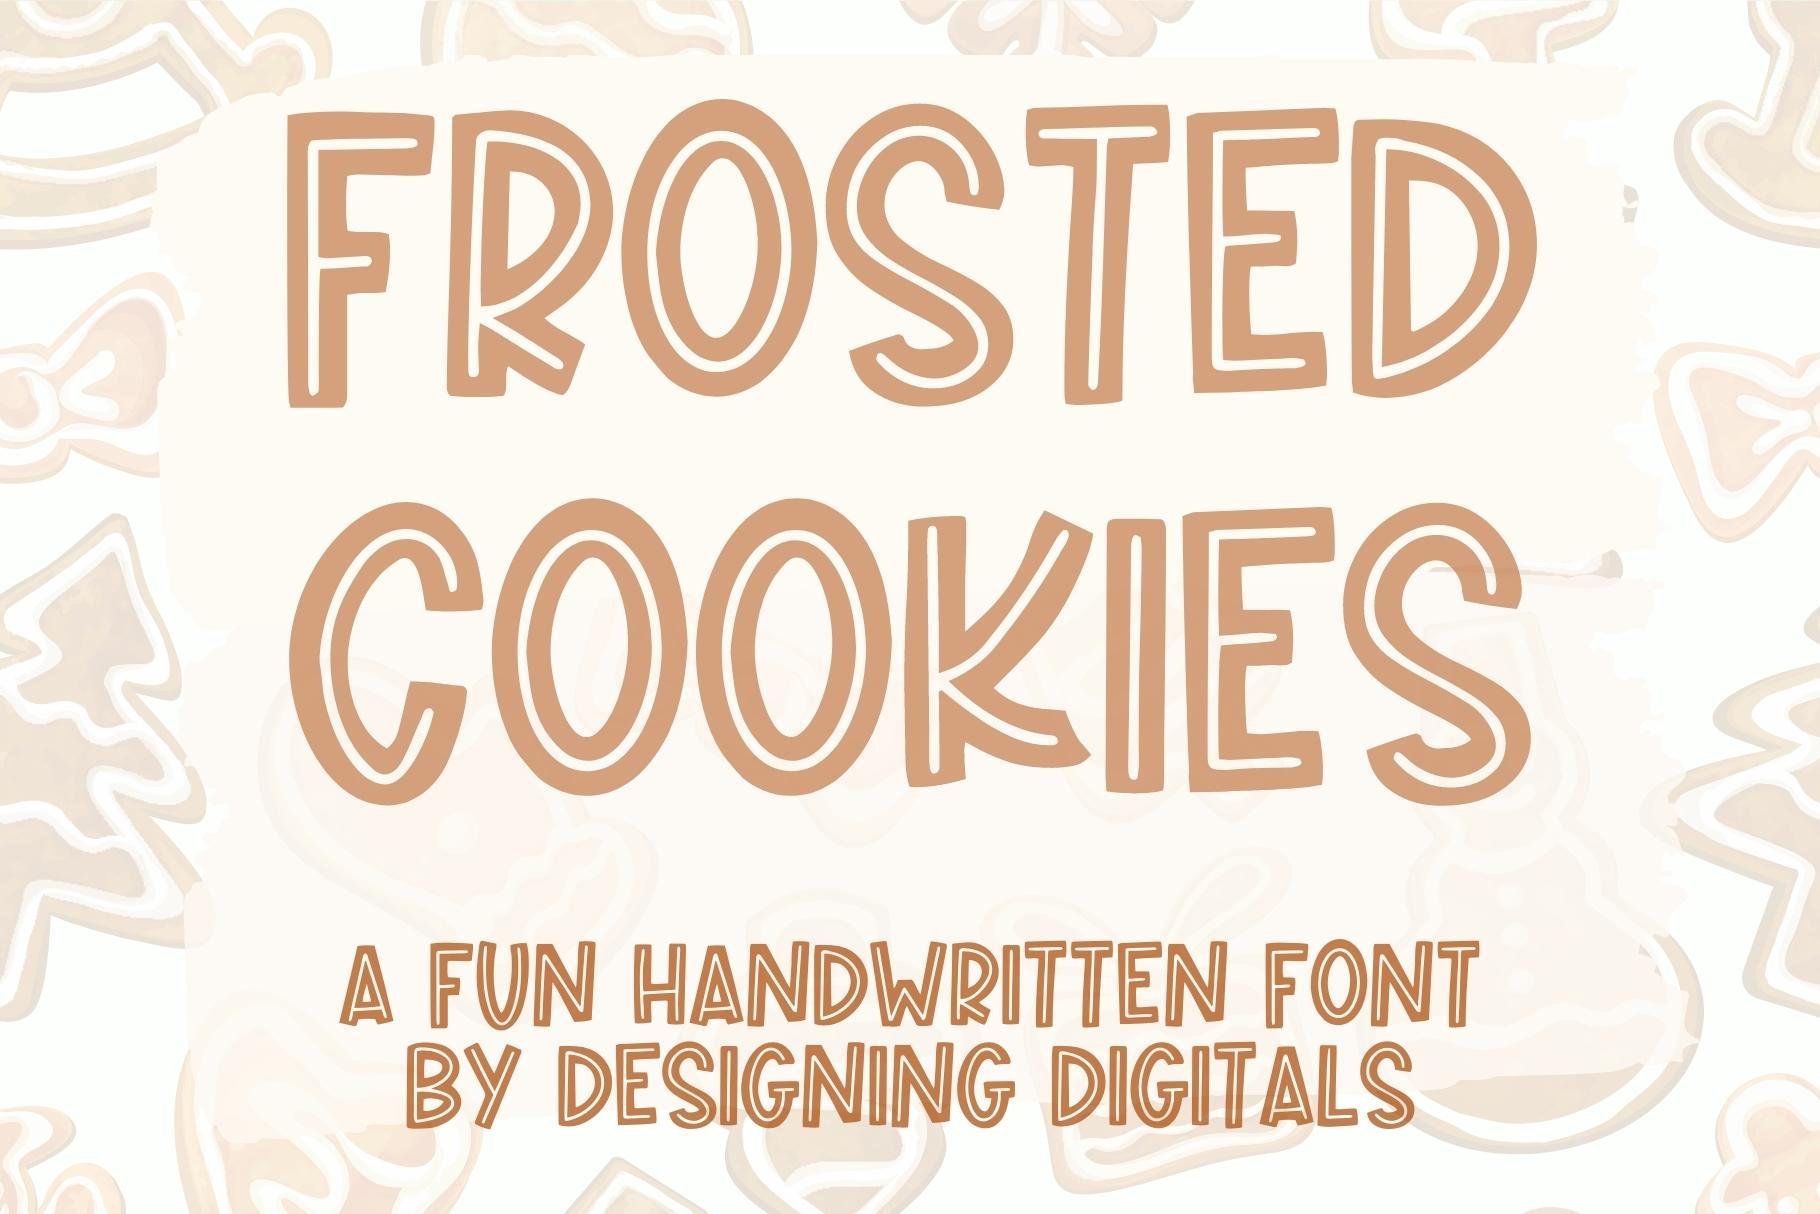 Frosted Cookies Lined Font cover image.